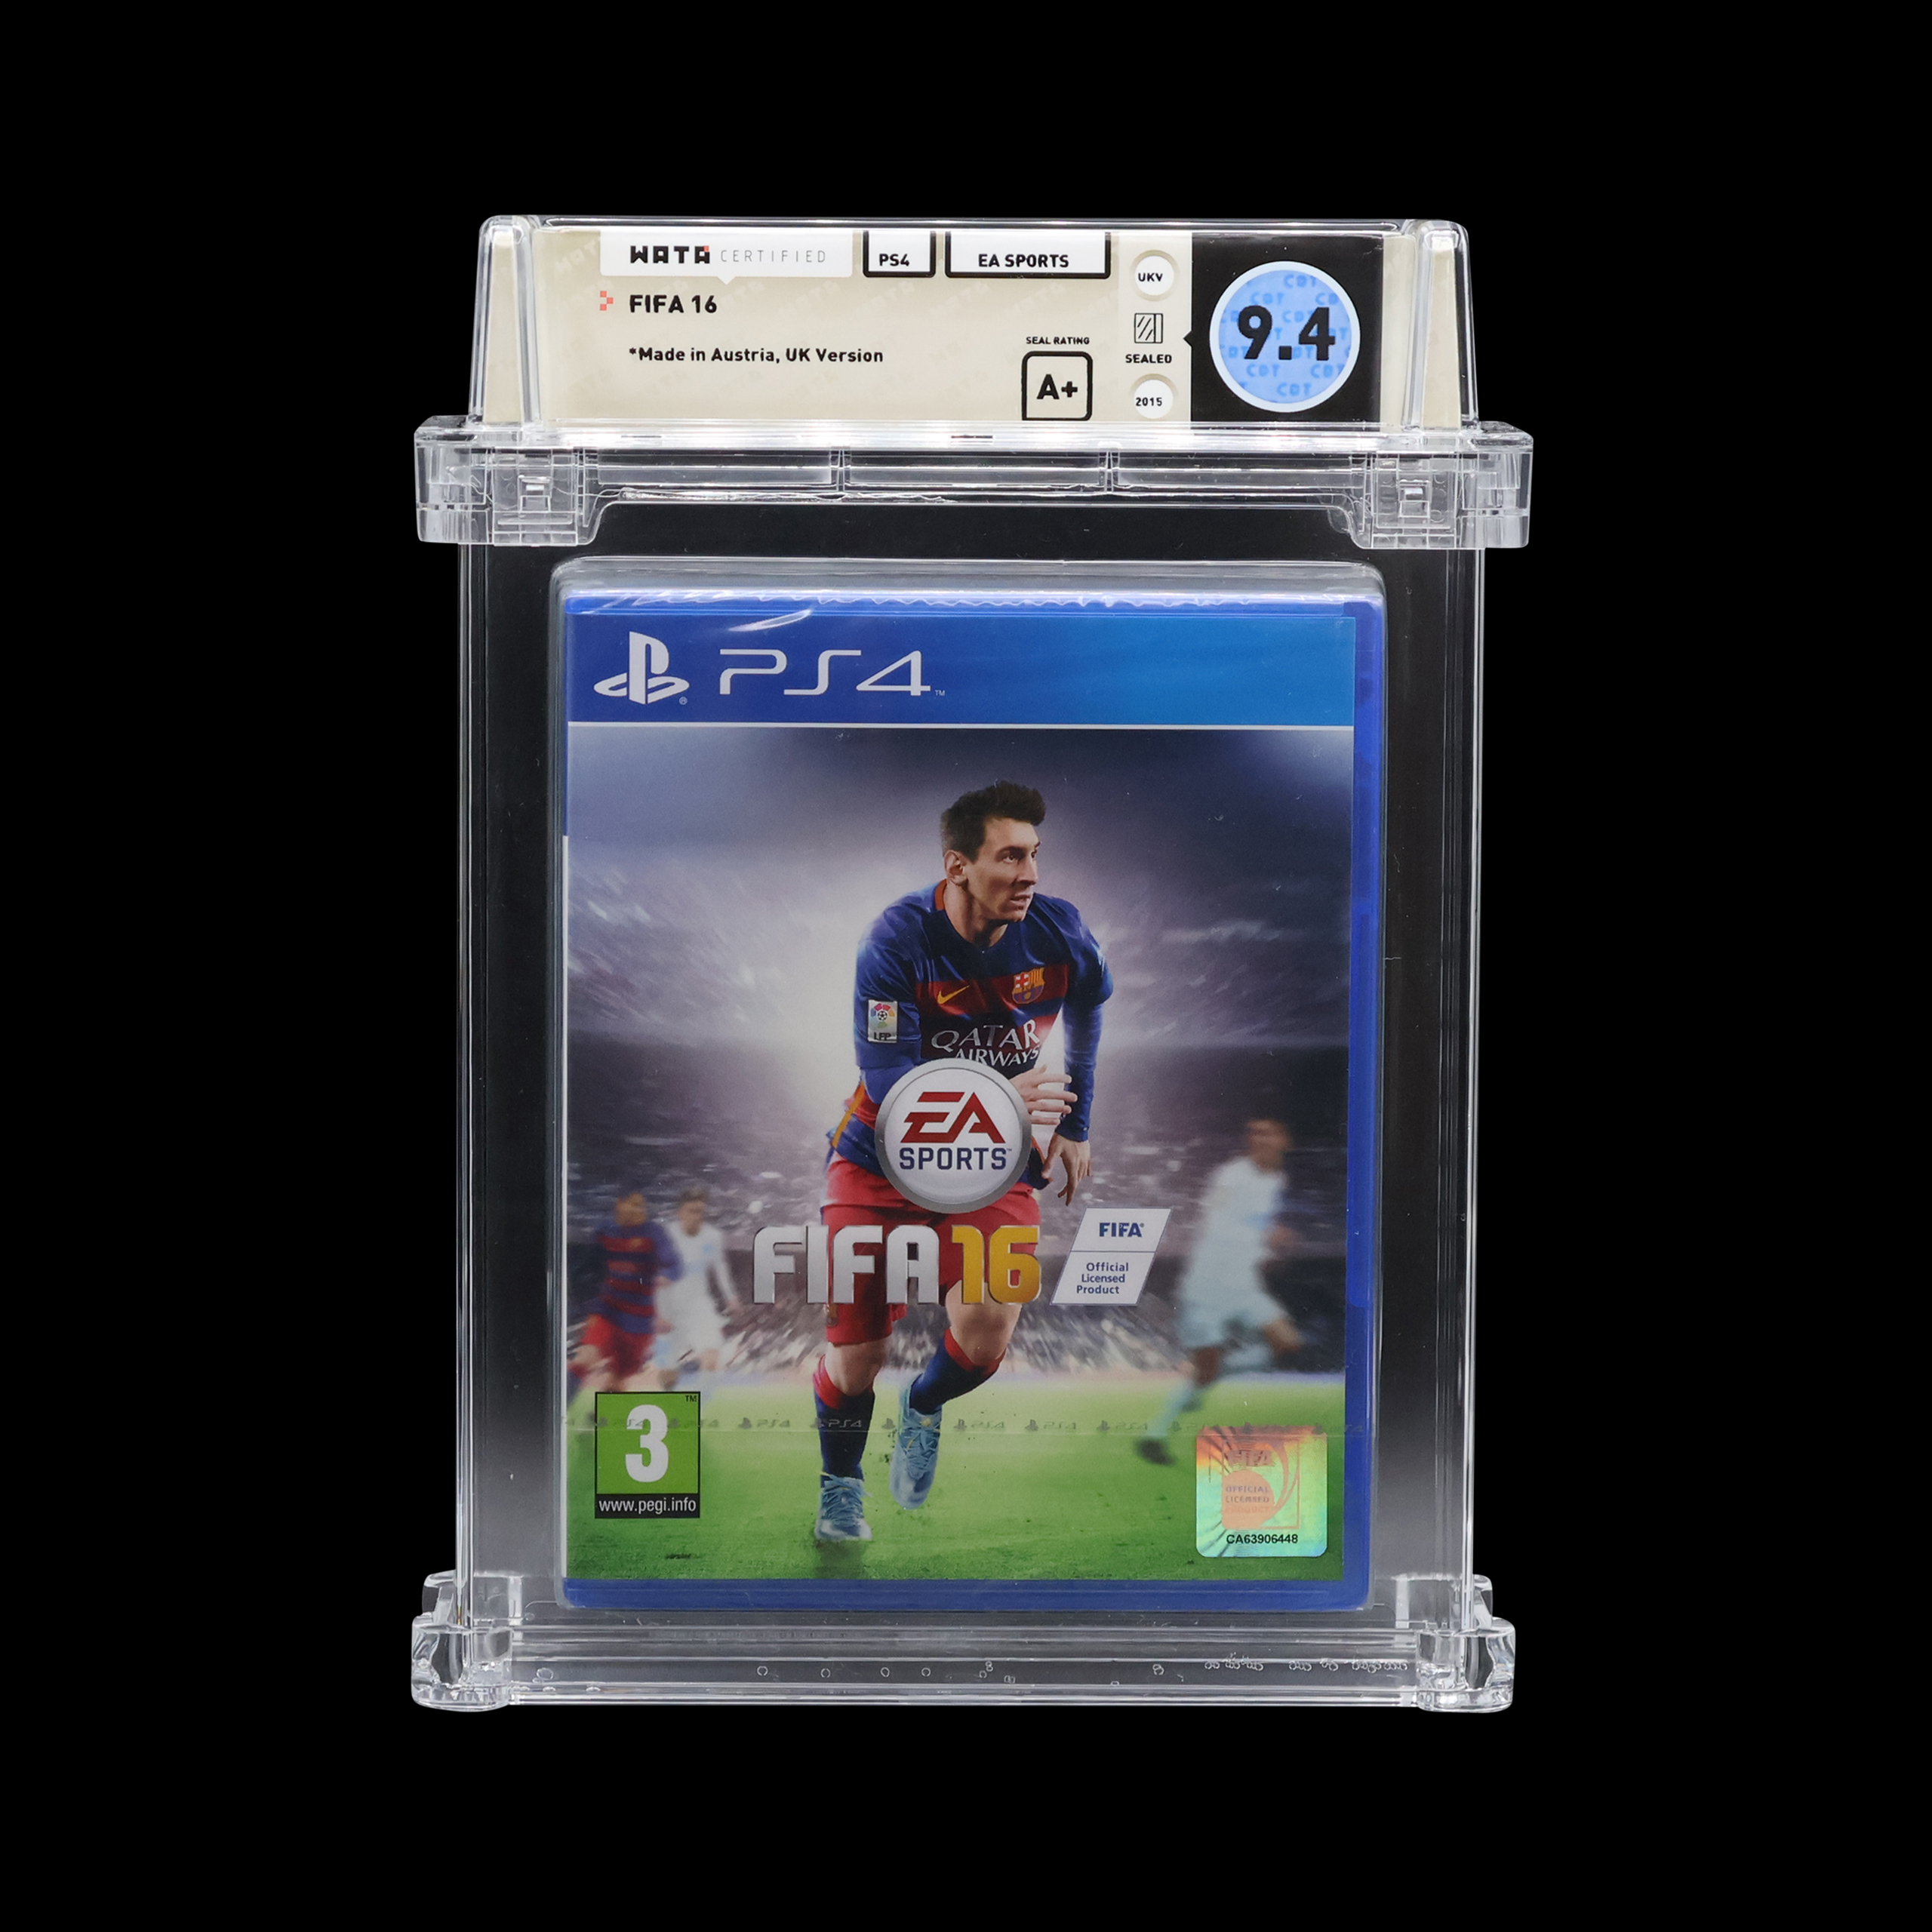 Collectible FIFA 16 PS4 game with a high WATA grade in protective case.